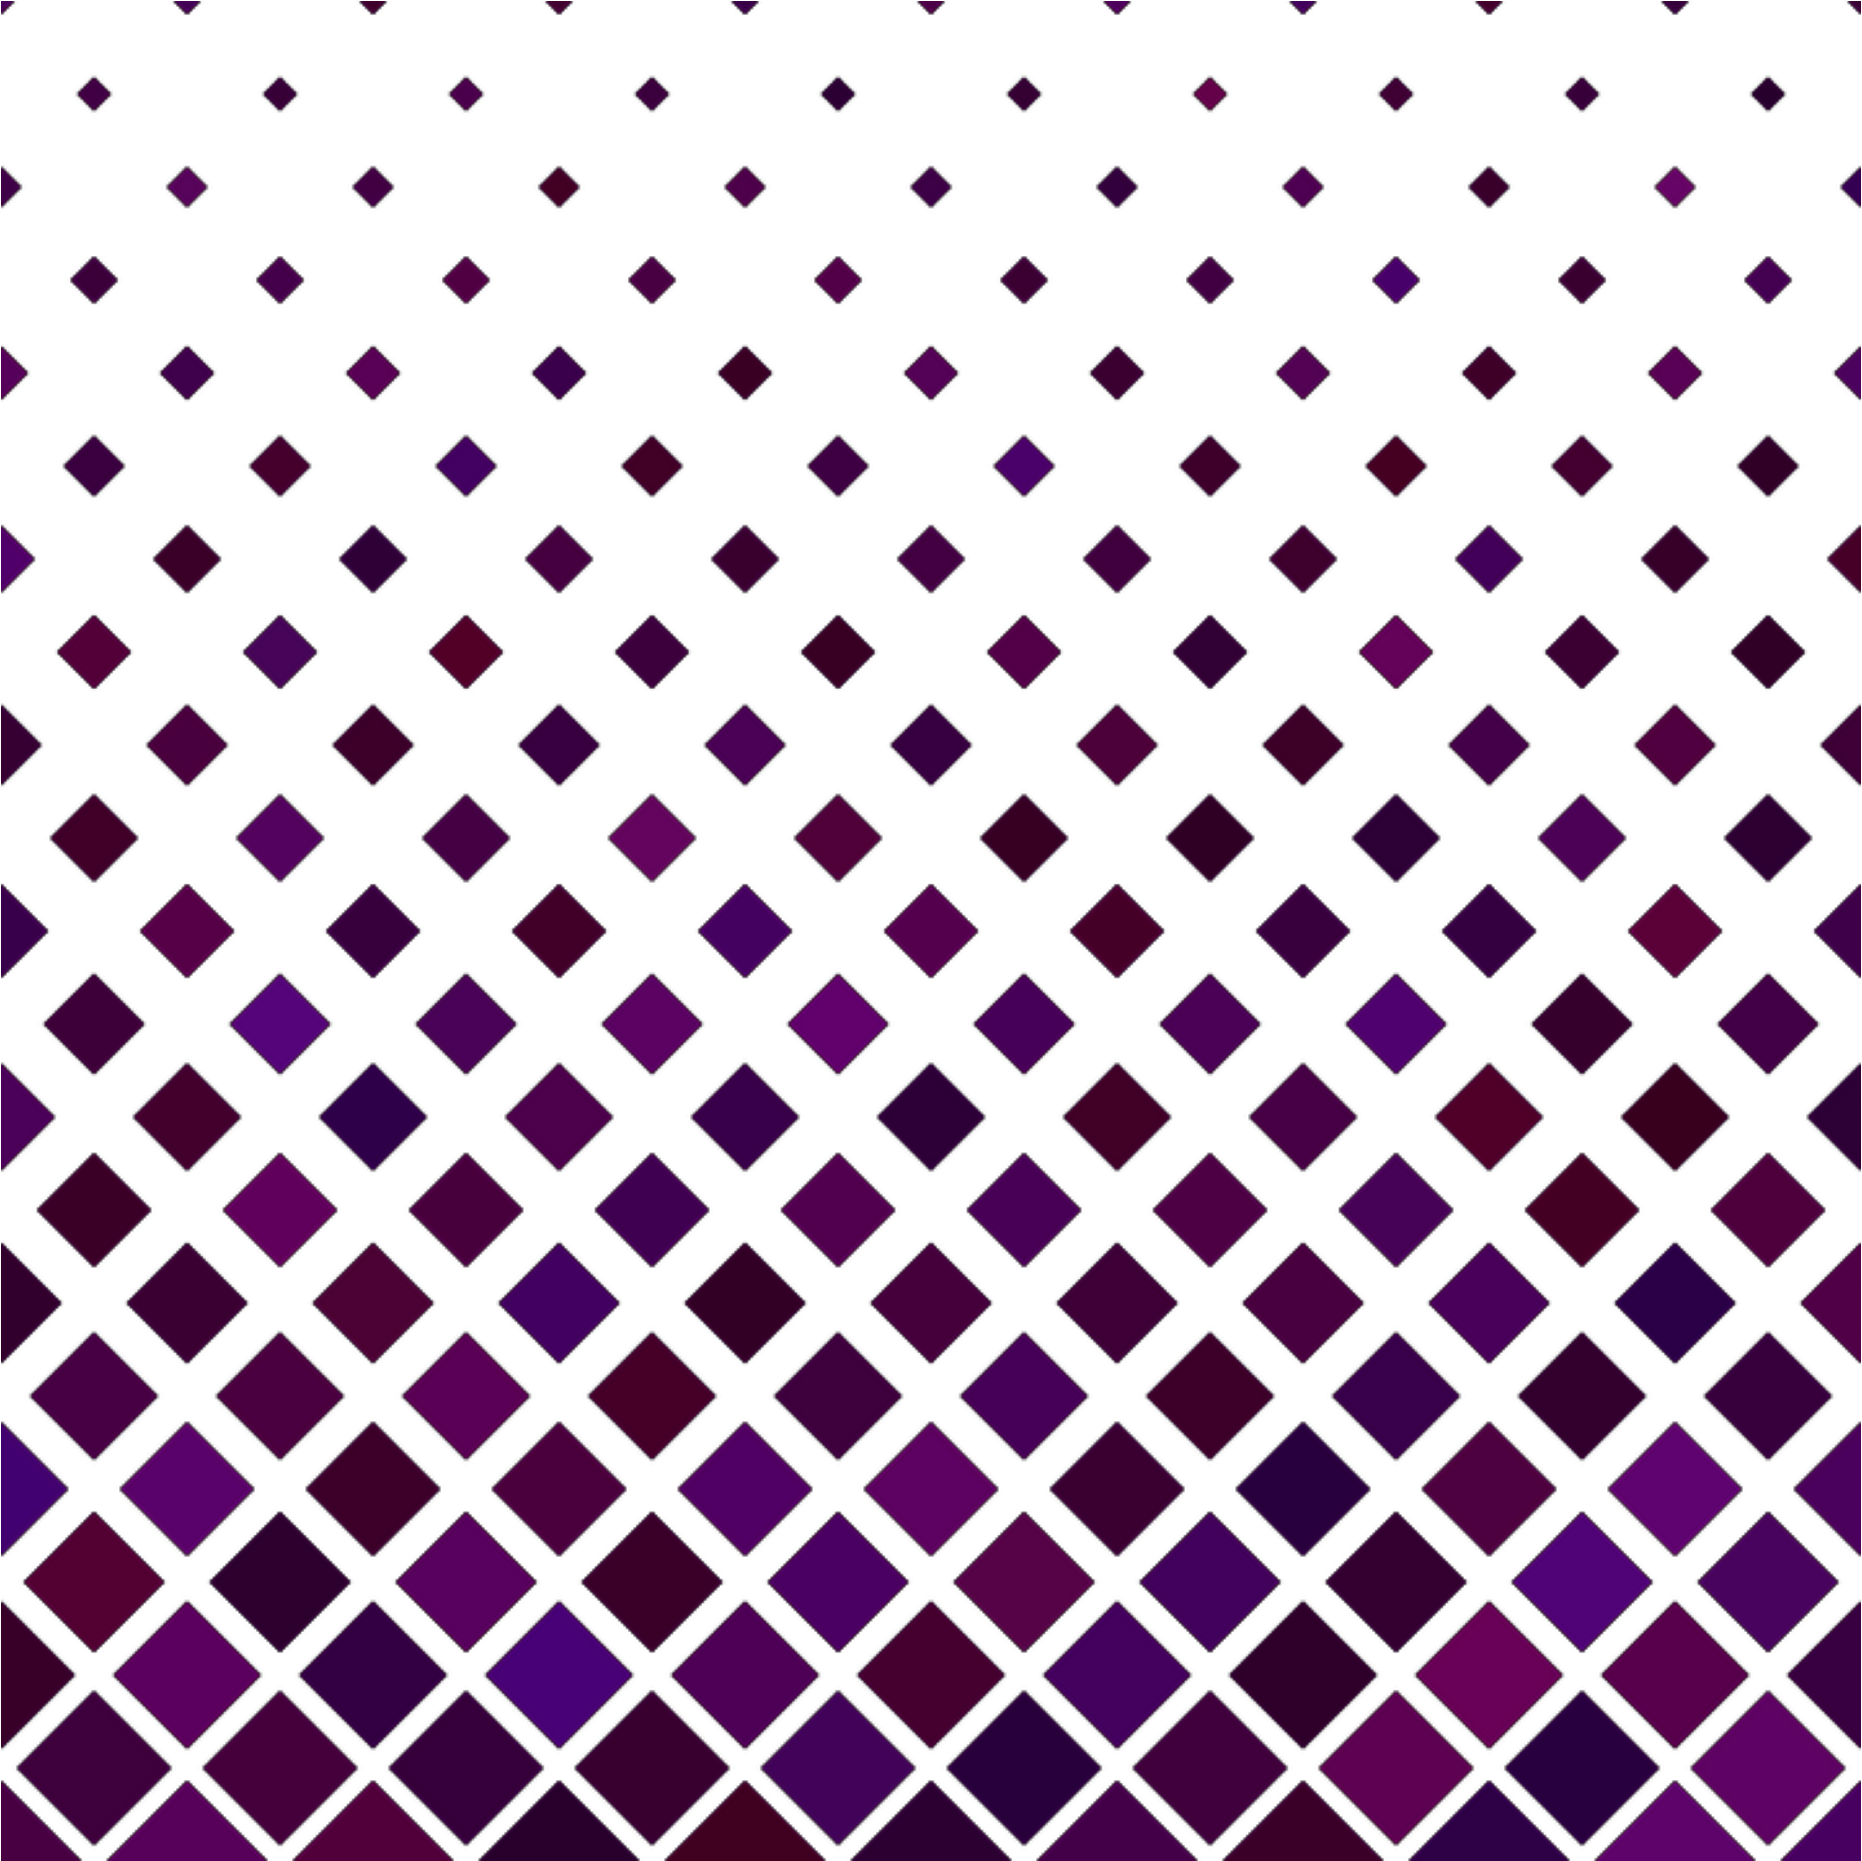 pattern overlay photoshop download